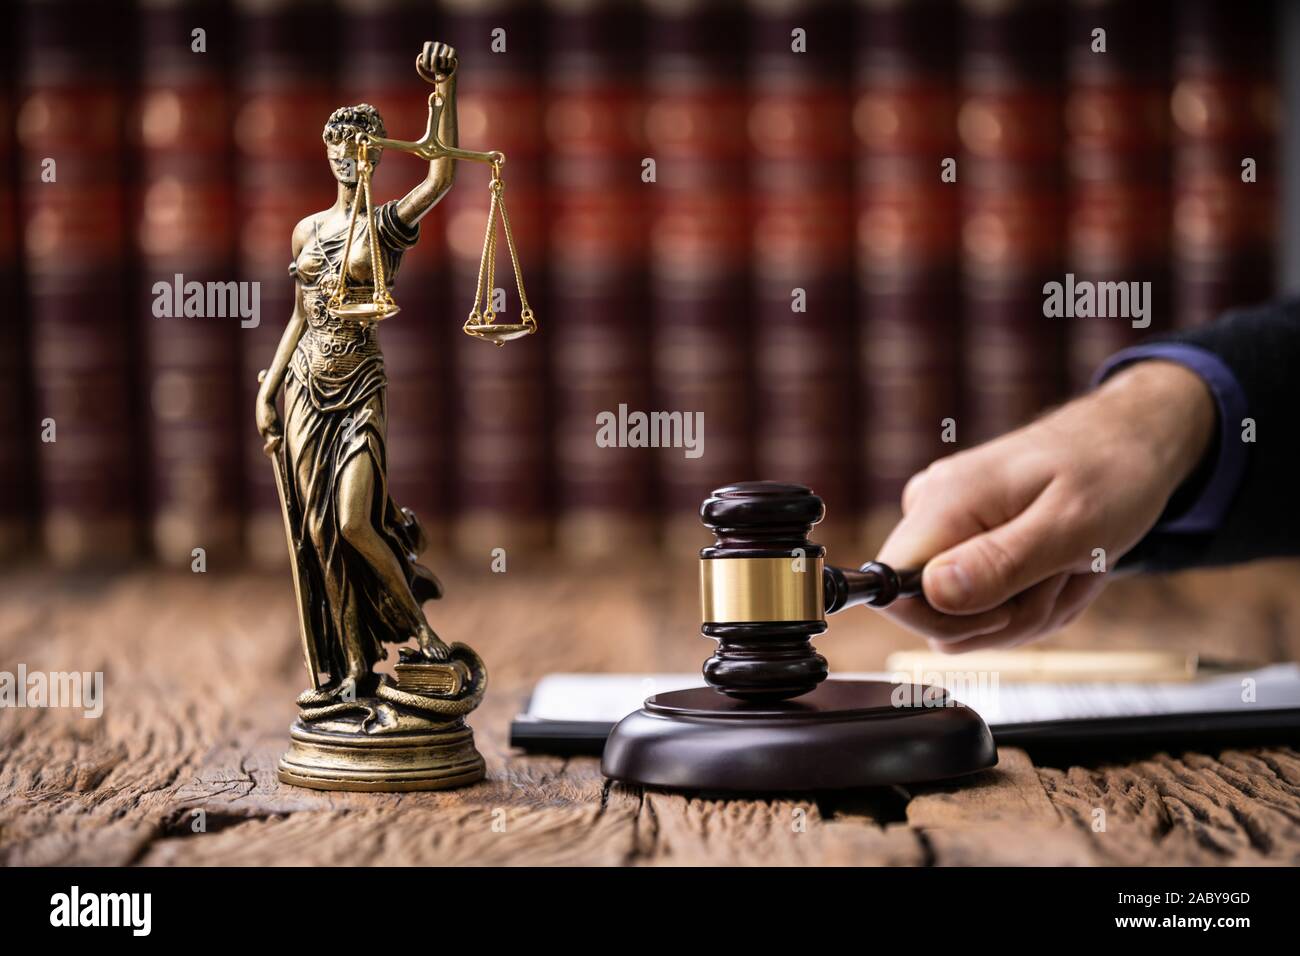 Mallet And Sounding Block With Statue Of Justice And Judge At Court Stock Photo